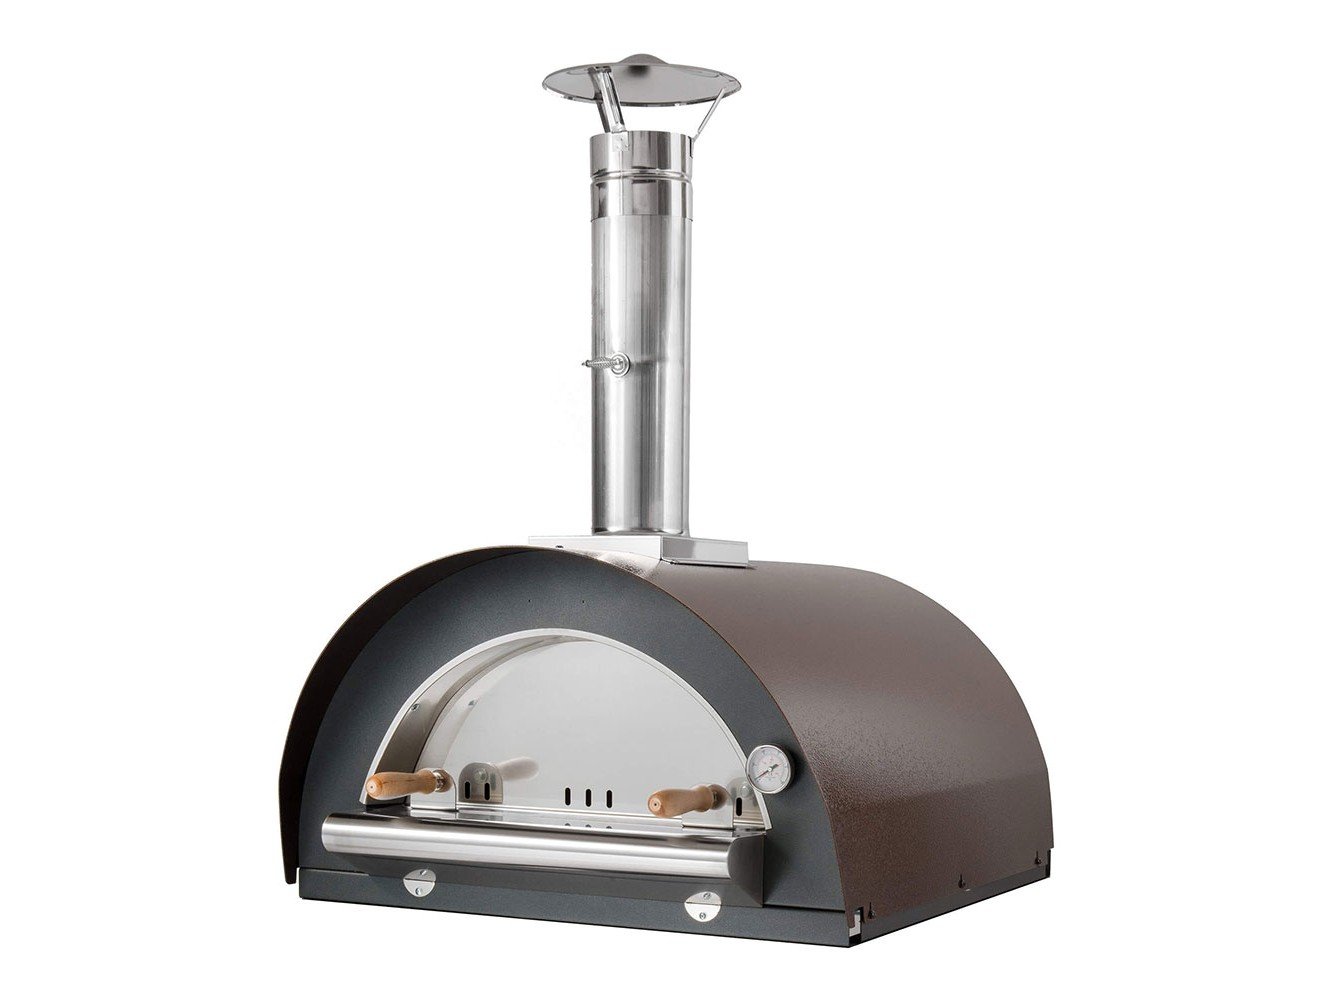 Family Wood Oven